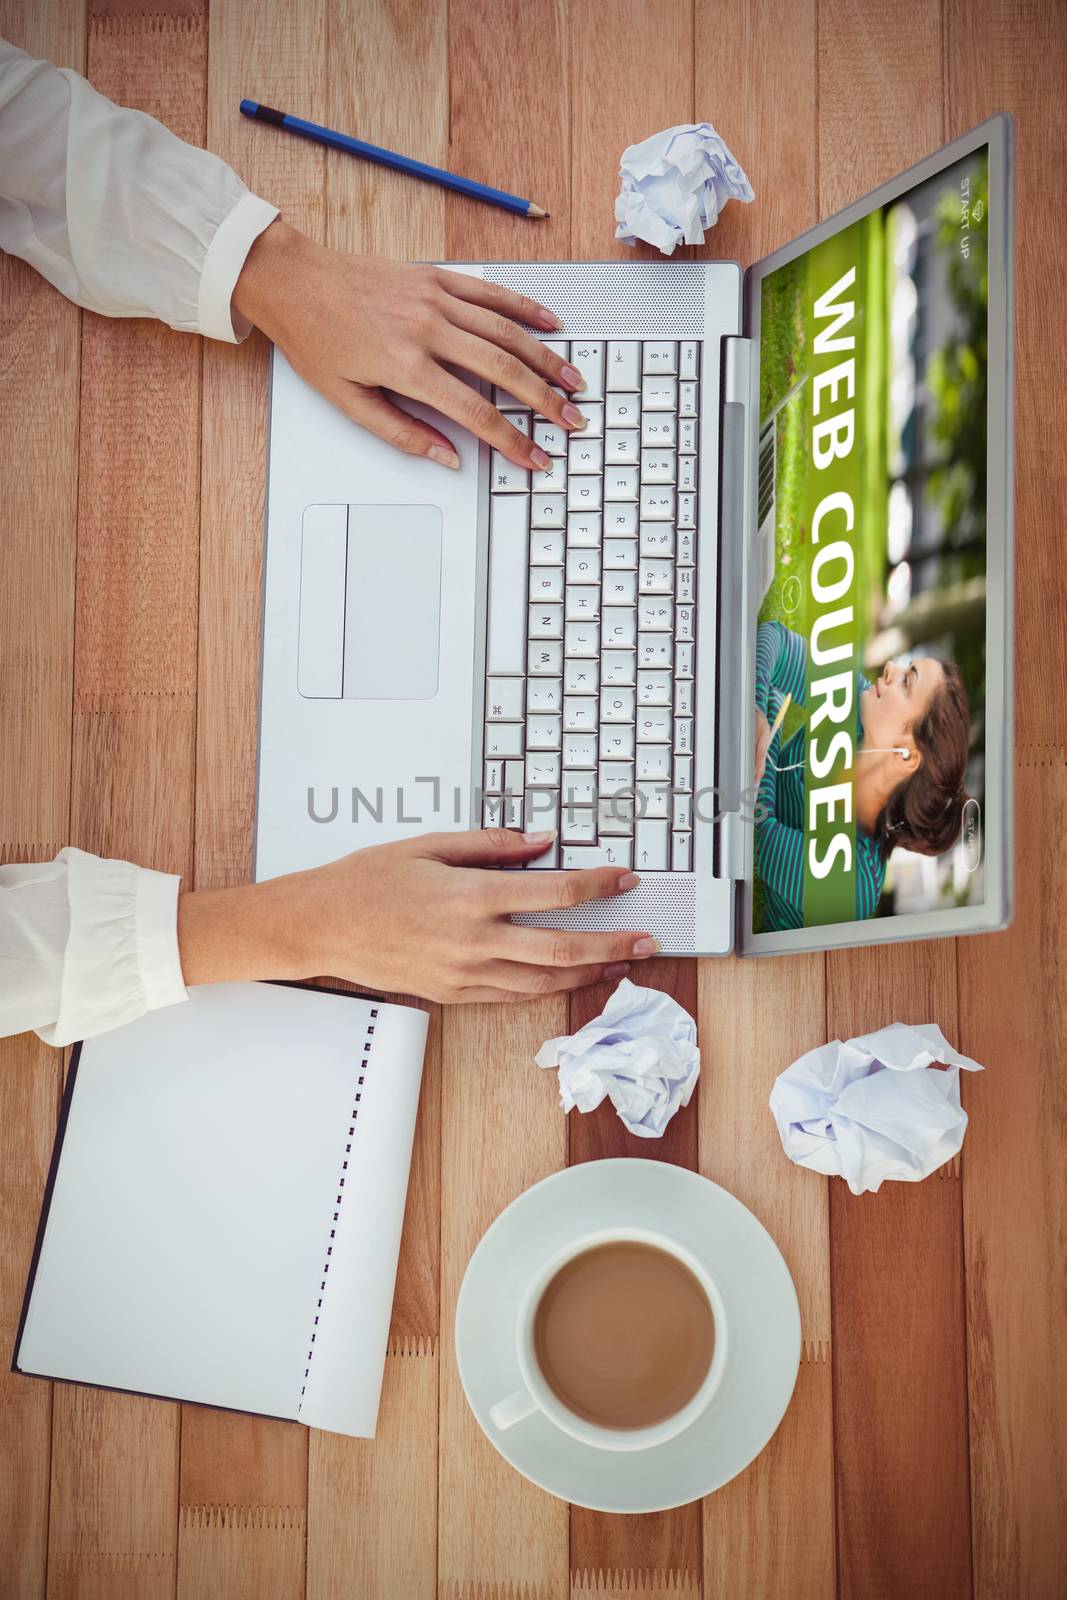 Web course ad against cropped image of woman using laptop